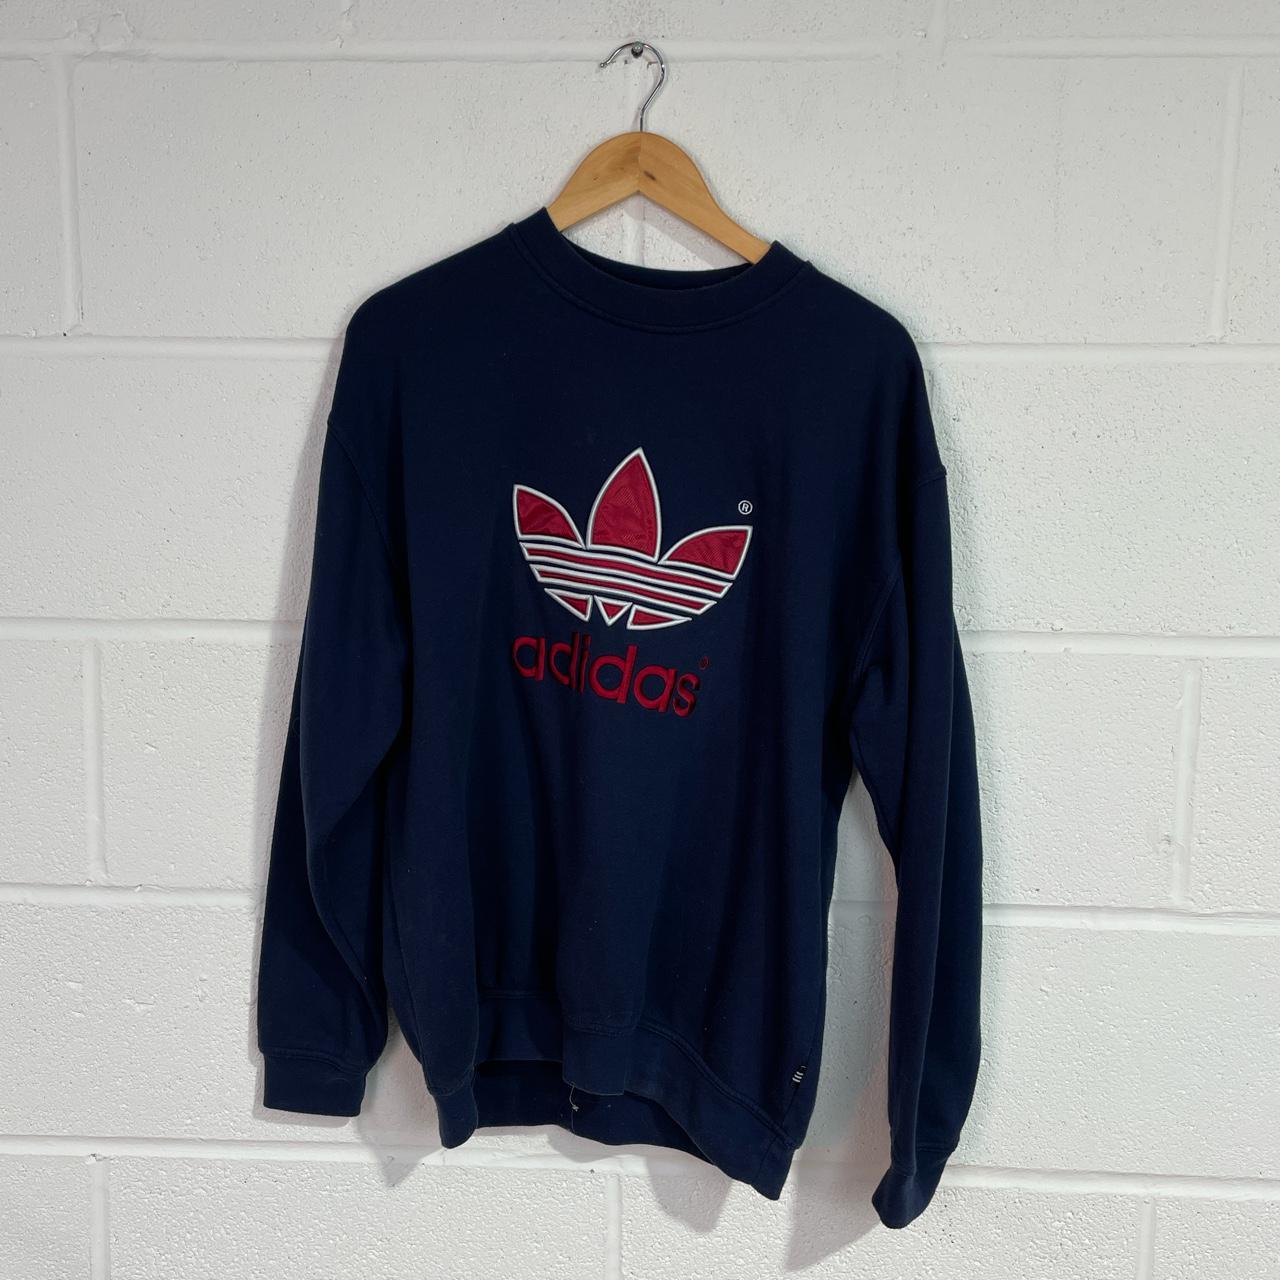 Vintage Adidas Navy and red sweatshirt with spellout... - Depop